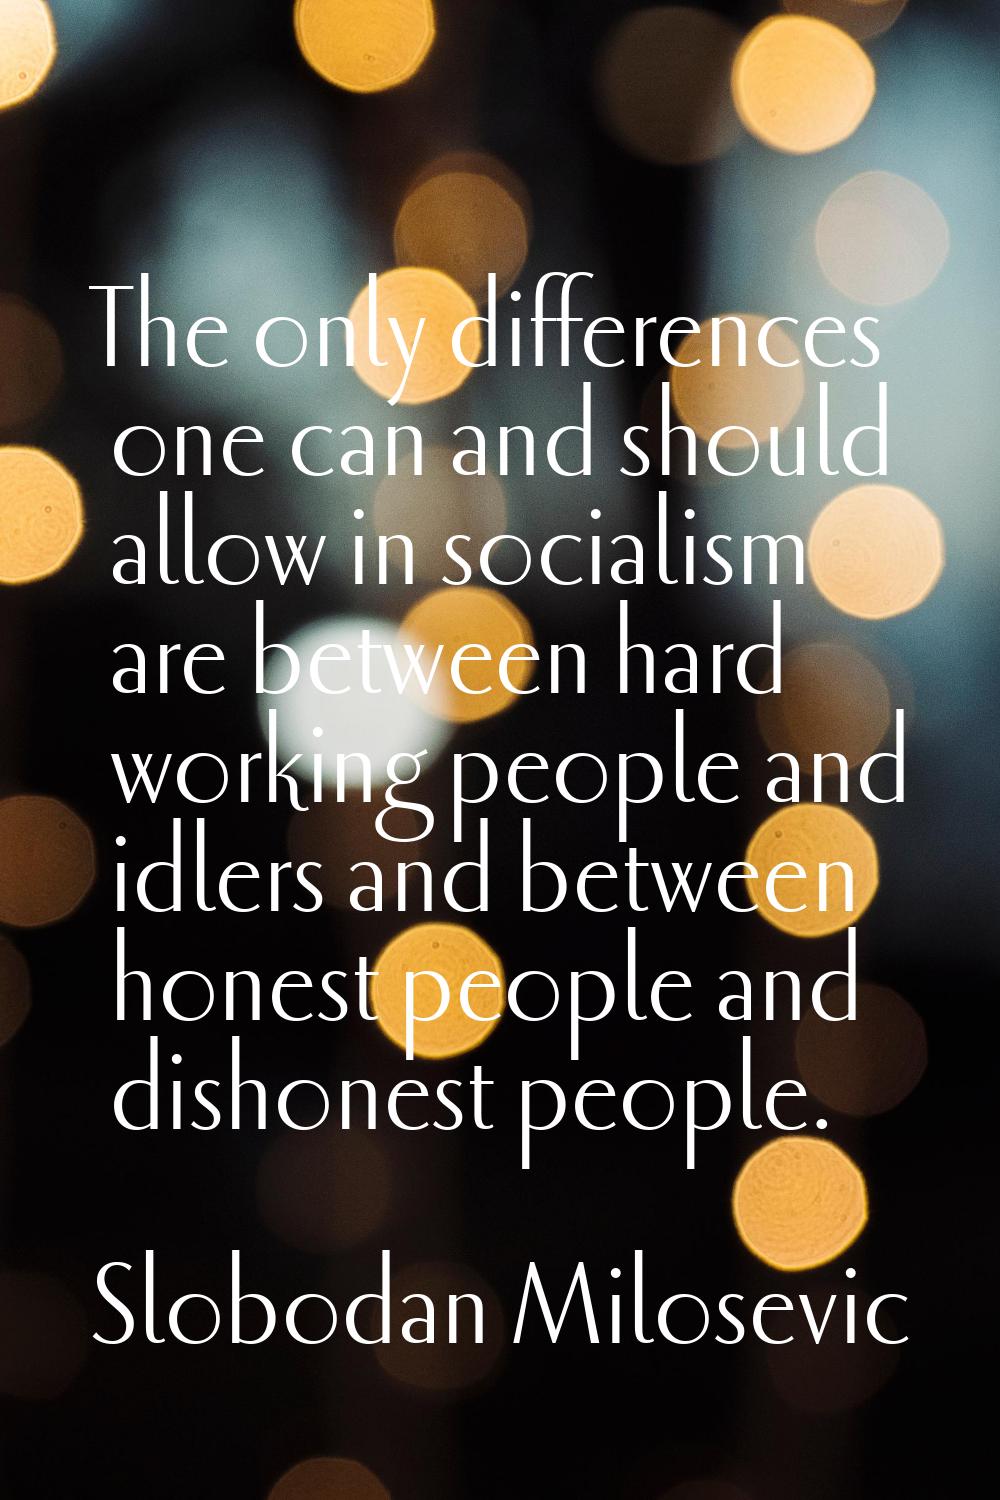 The only differences one can and should allow in socialism are between hard working people and idle